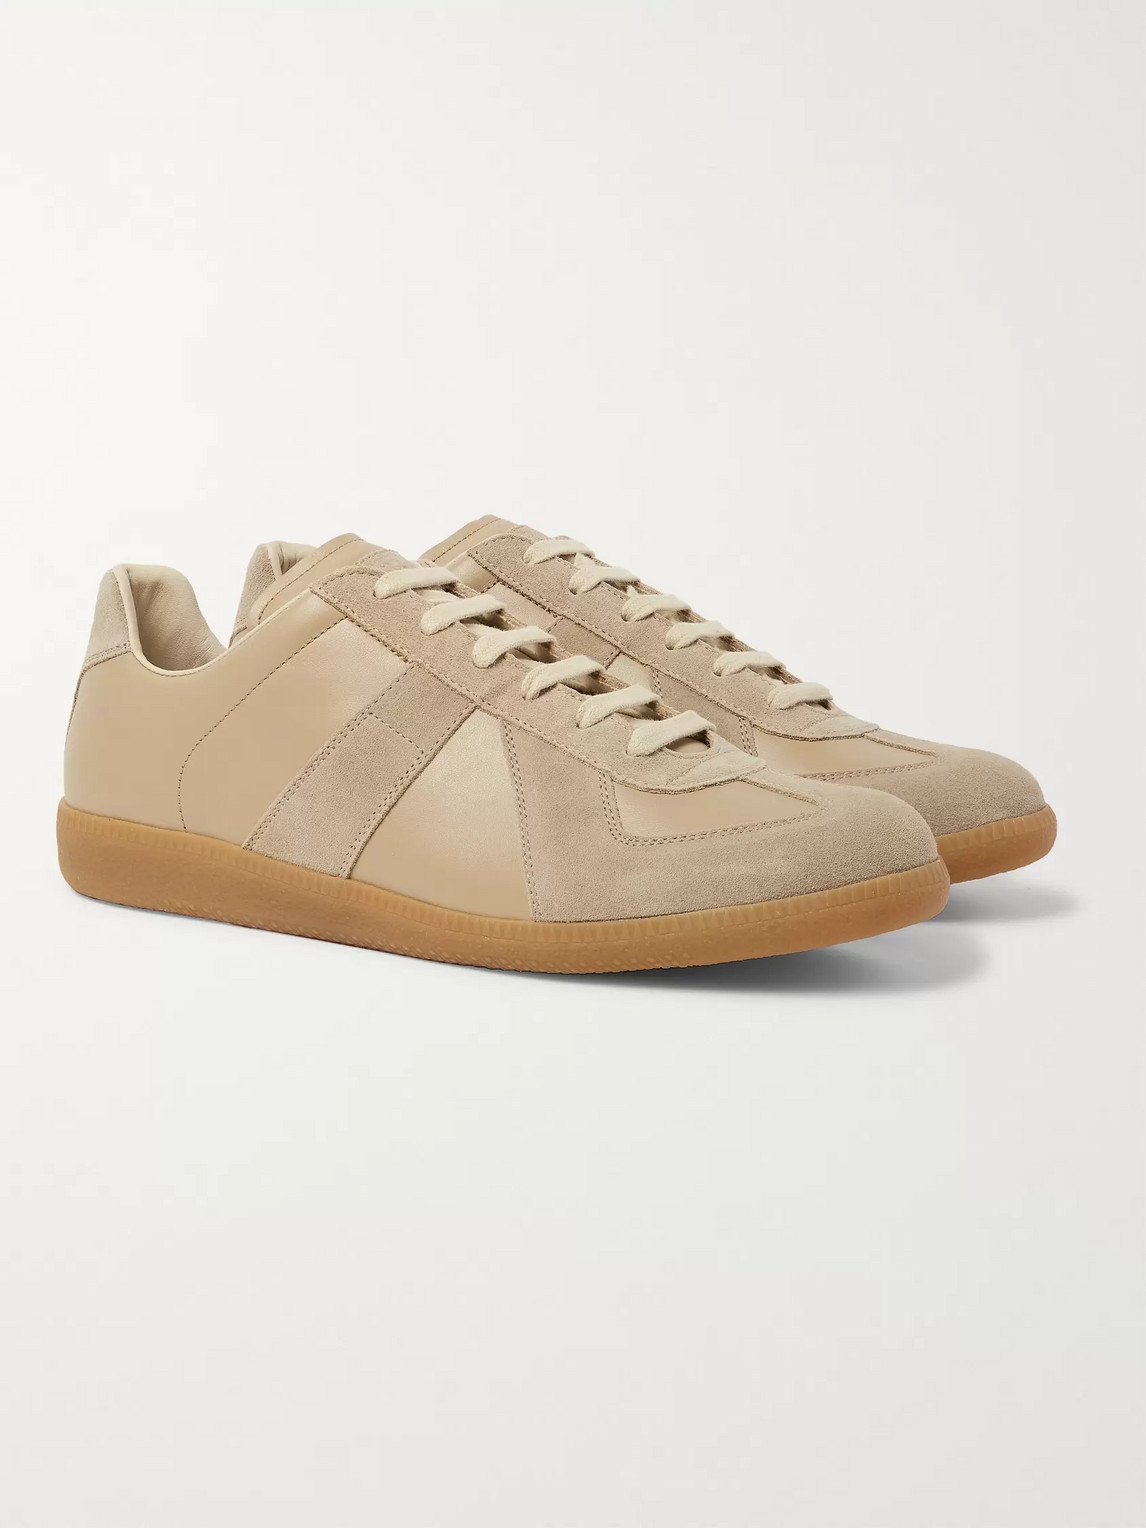 MAISON MARGIELA REPLICA SUEDE AND LEATHER trainers